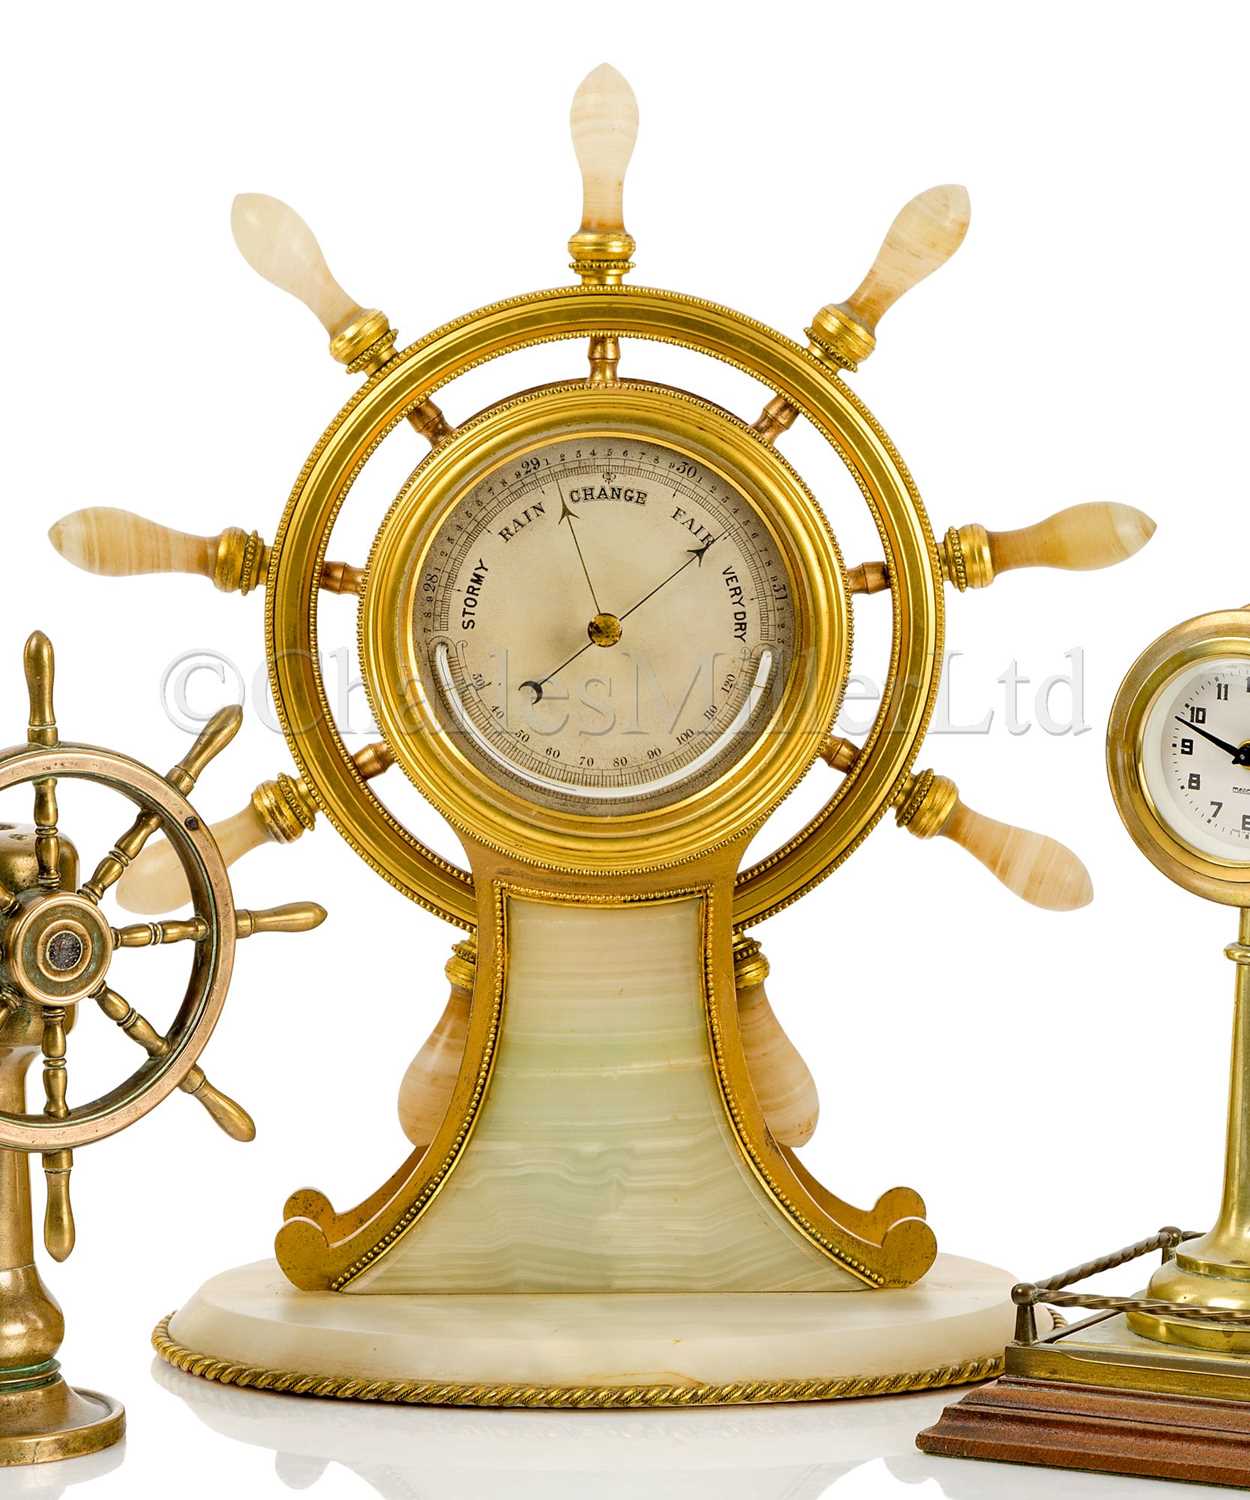 Lot 41 - A FINE AND LARGE GILT, BRASS AND AGATE SHIP’S WHEEL DESK BAROMETER, ATTRIBUTED TO BETJEMANN & SONS CIRCA 1870